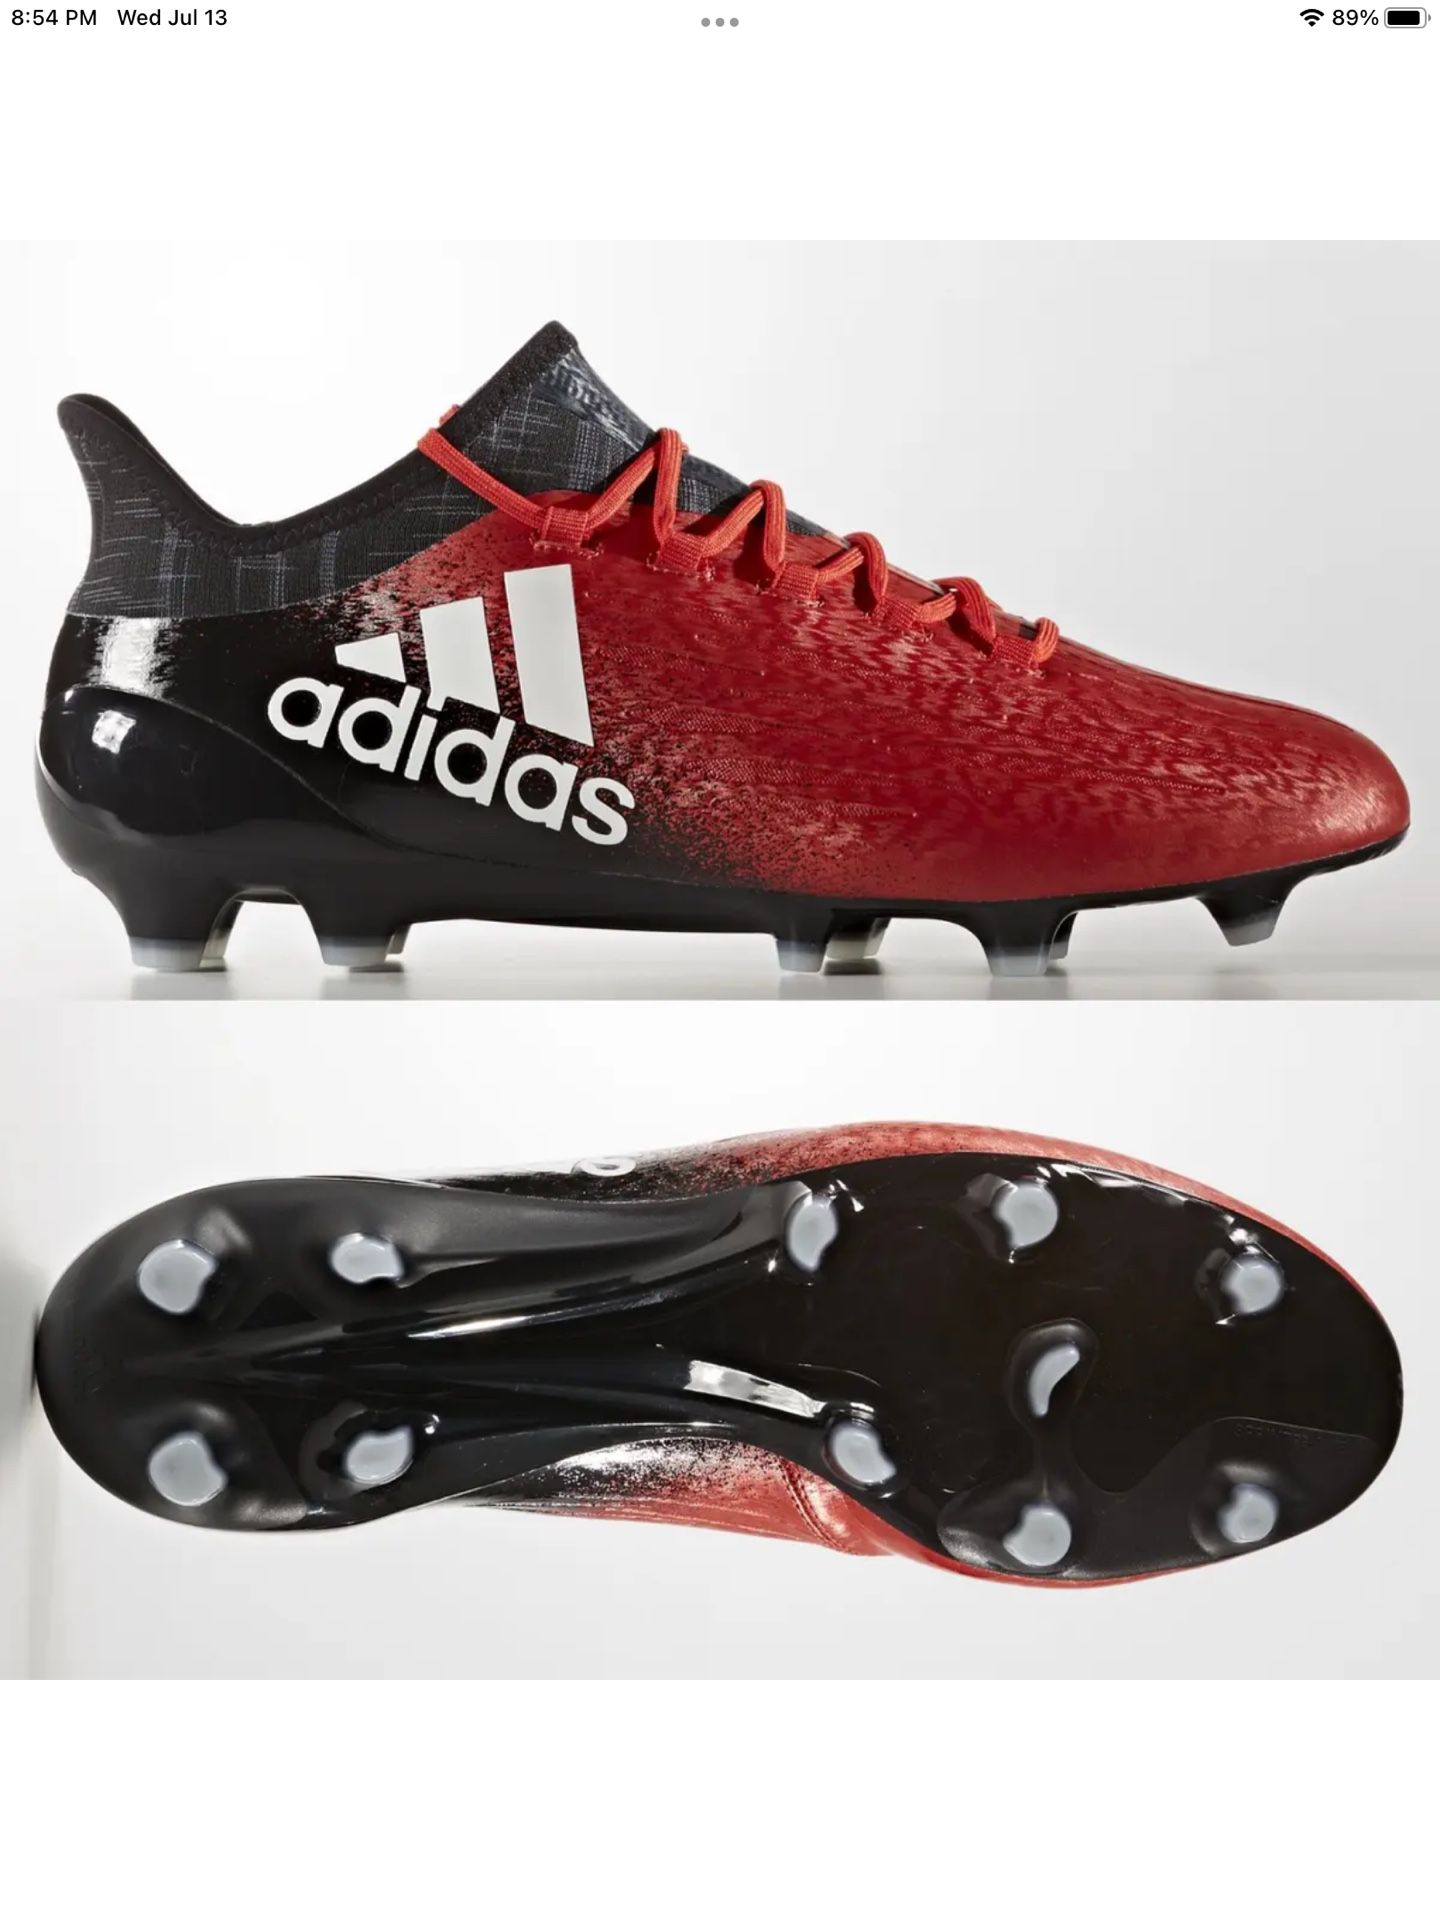 fuerte Kenia científico ADIDAS X 16.1 FG Men's BB5618 Techfit Red Black Soccer Cleats NEW Size 11.  for Sale in Pasadena, CA - OfferUp